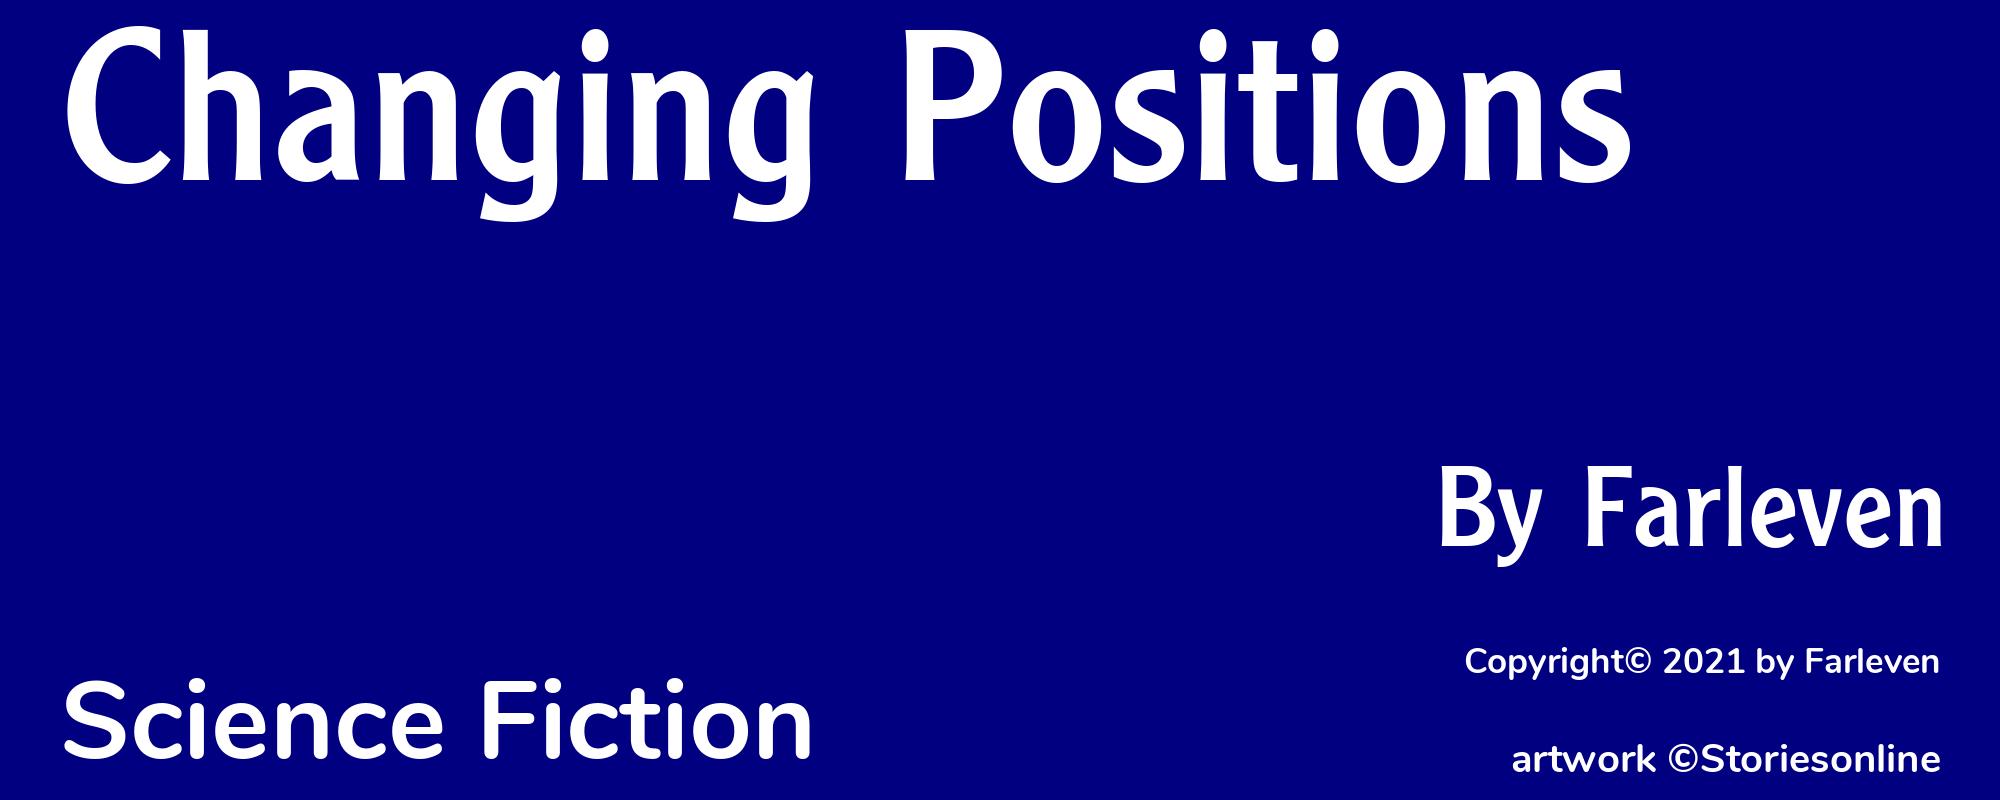 Changing Positions - Cover